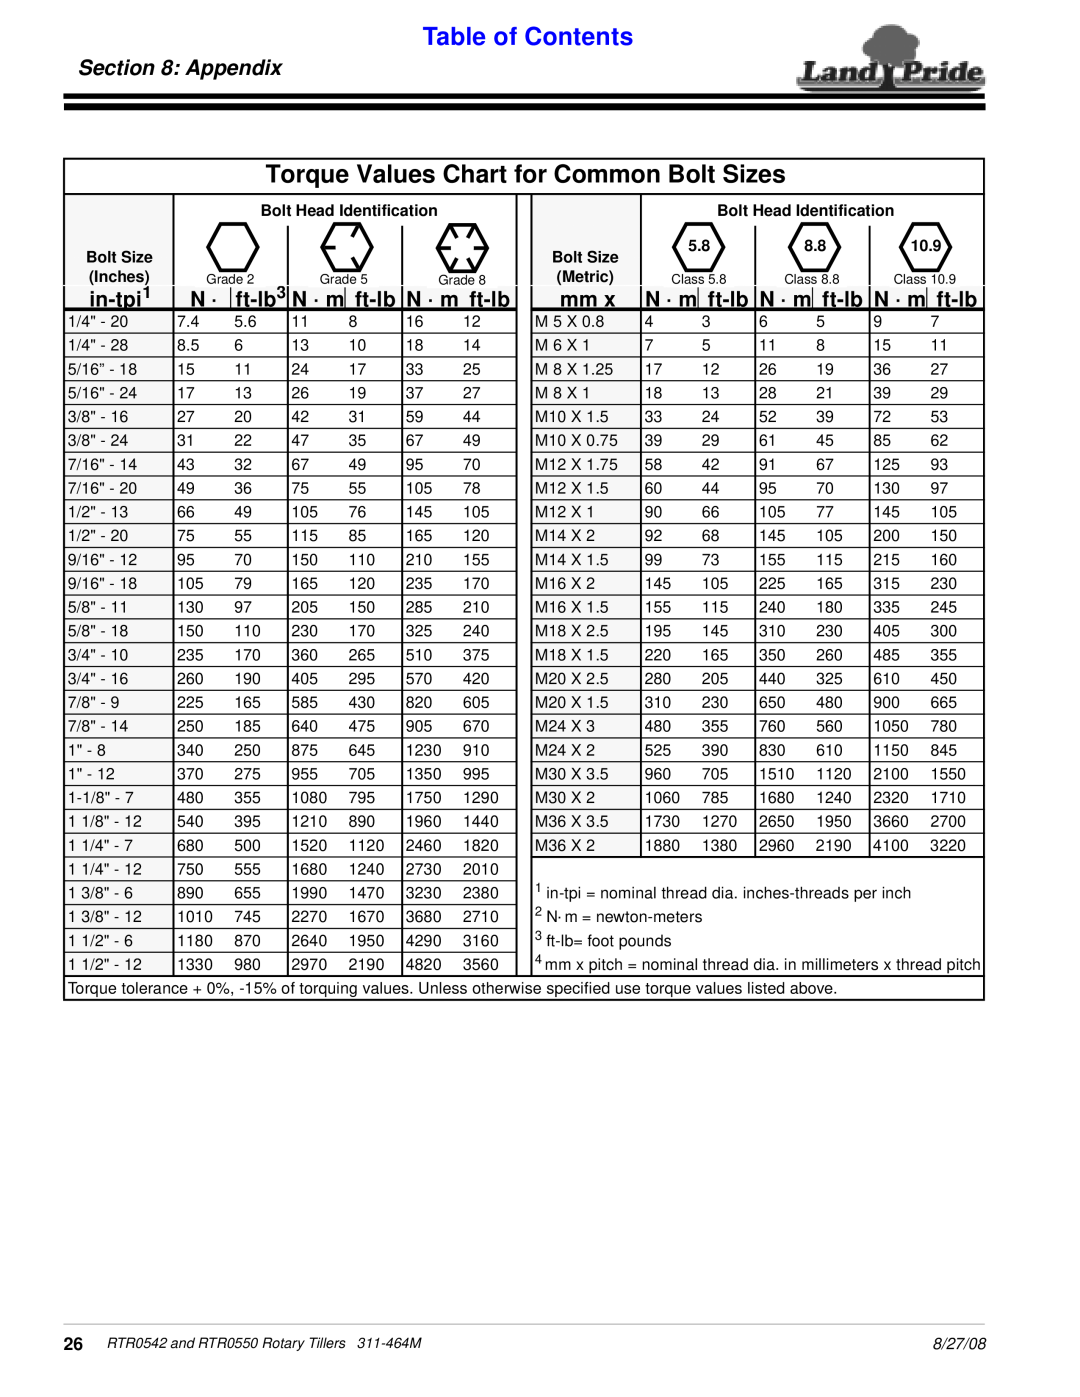 Land Pride RTR0542, RTR0550 manual Torque Values Chart for Common Bolt Sizes, Appendix, Table of Contents 